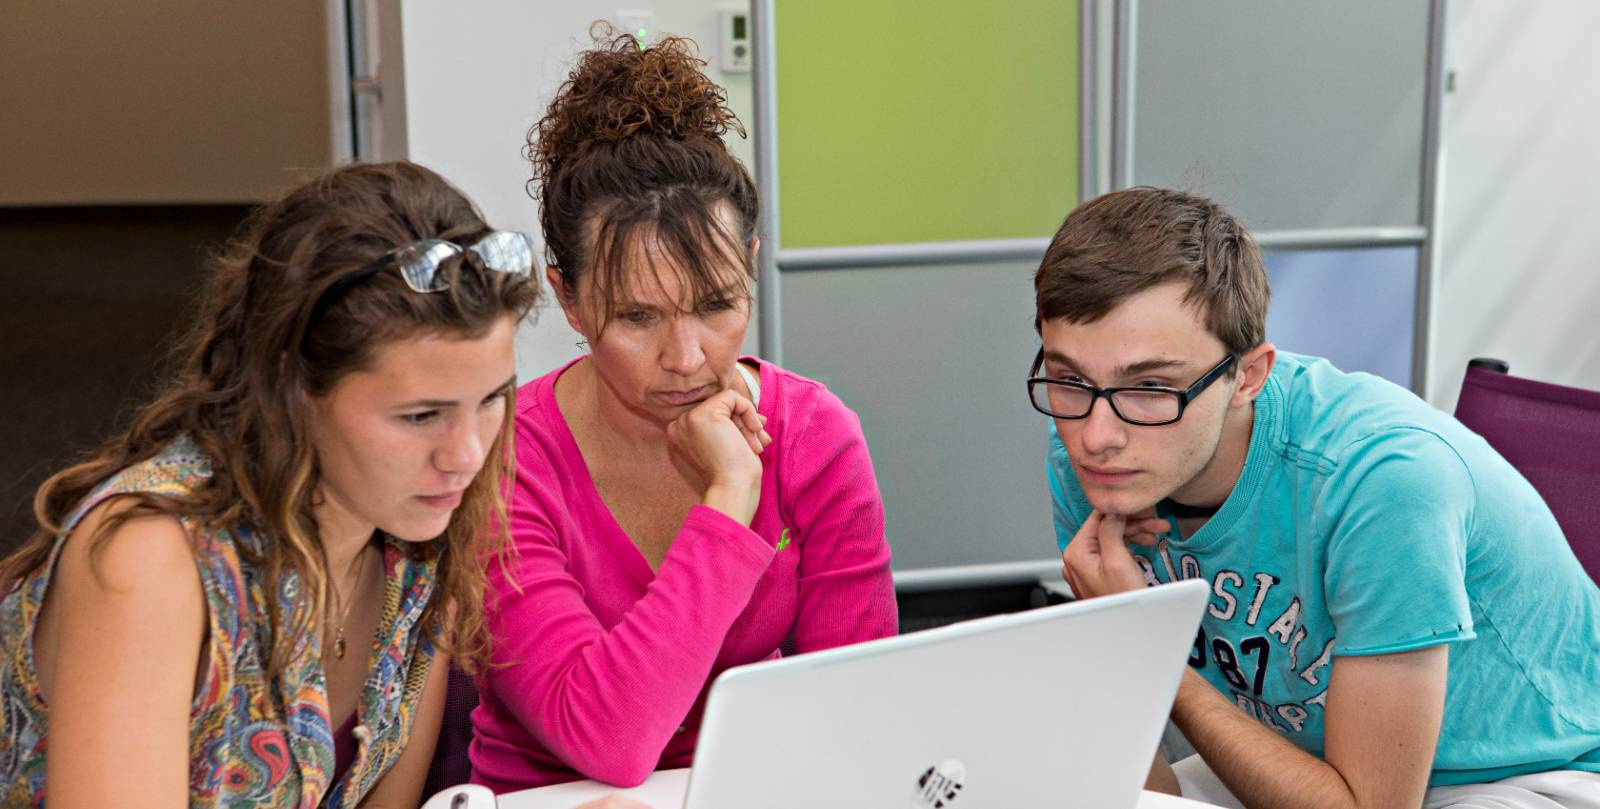 three students working together on a laptop